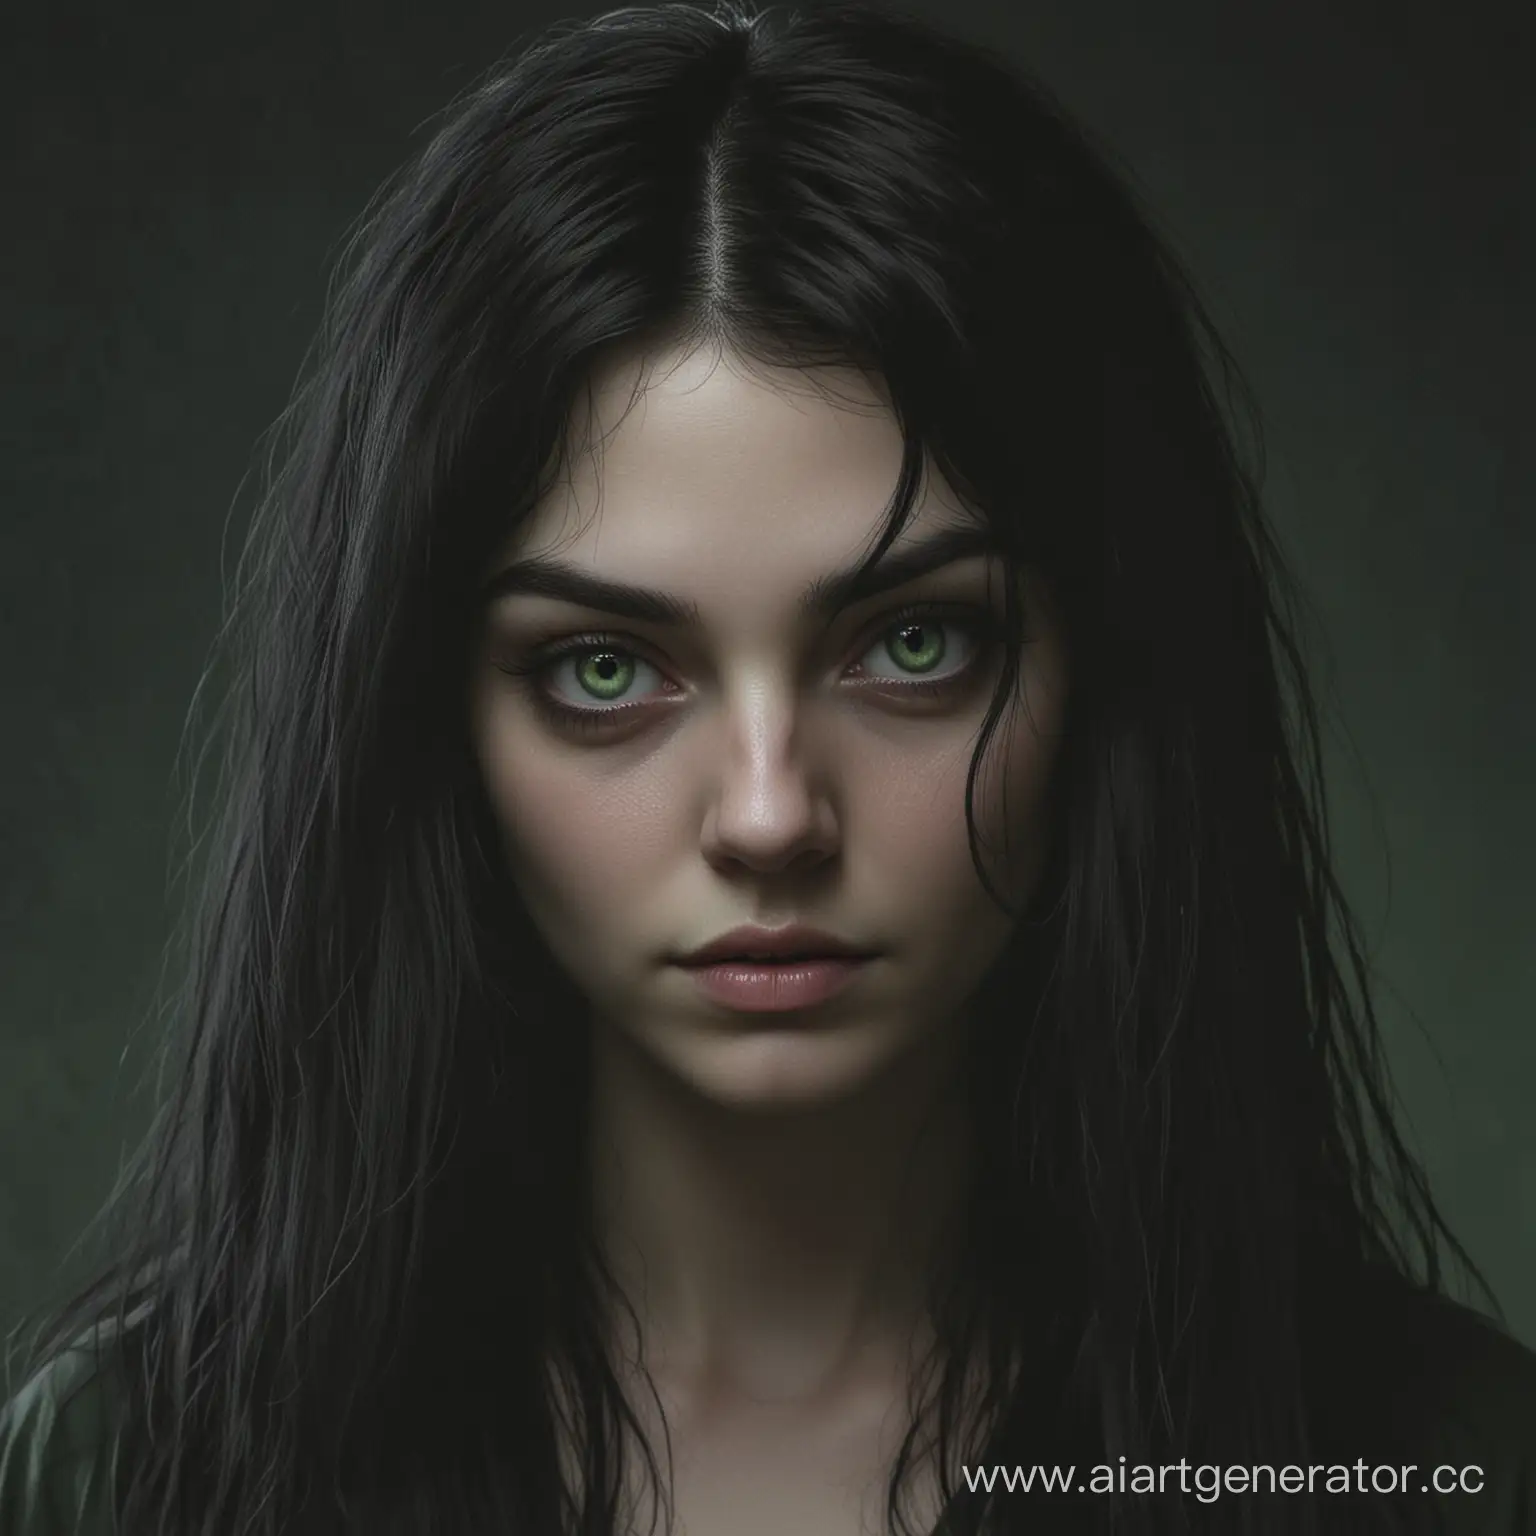 Mysterious-WitchGirl-with-Green-Eyes-and-Black-Hair-Portrait